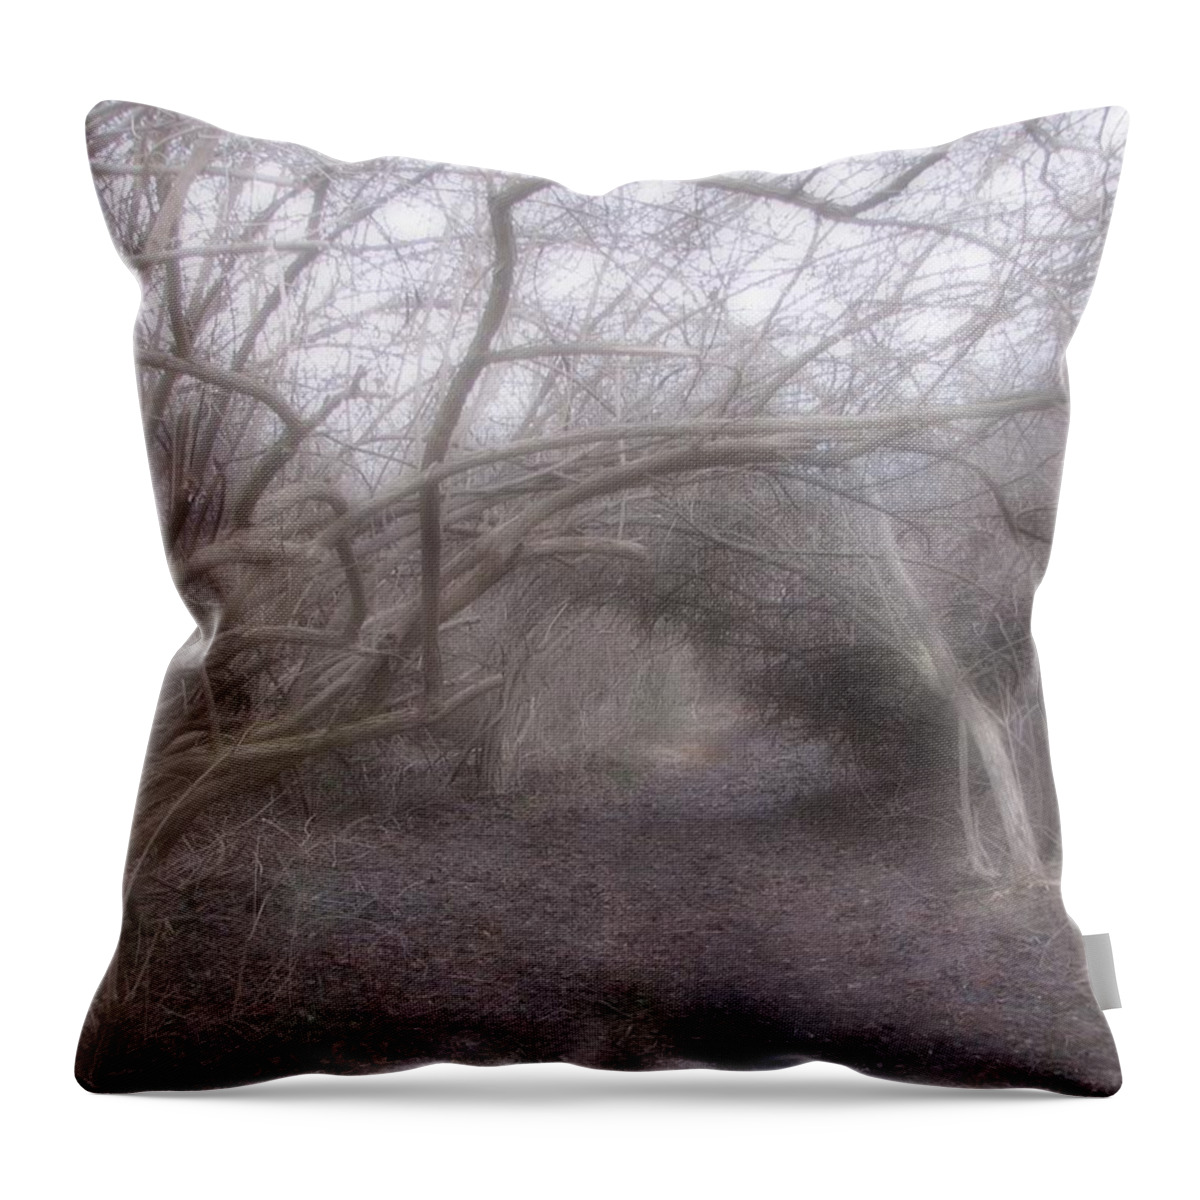 Arching Branches Throw Pillow featuring the photograph Beckoning Dream by Roxy Riou